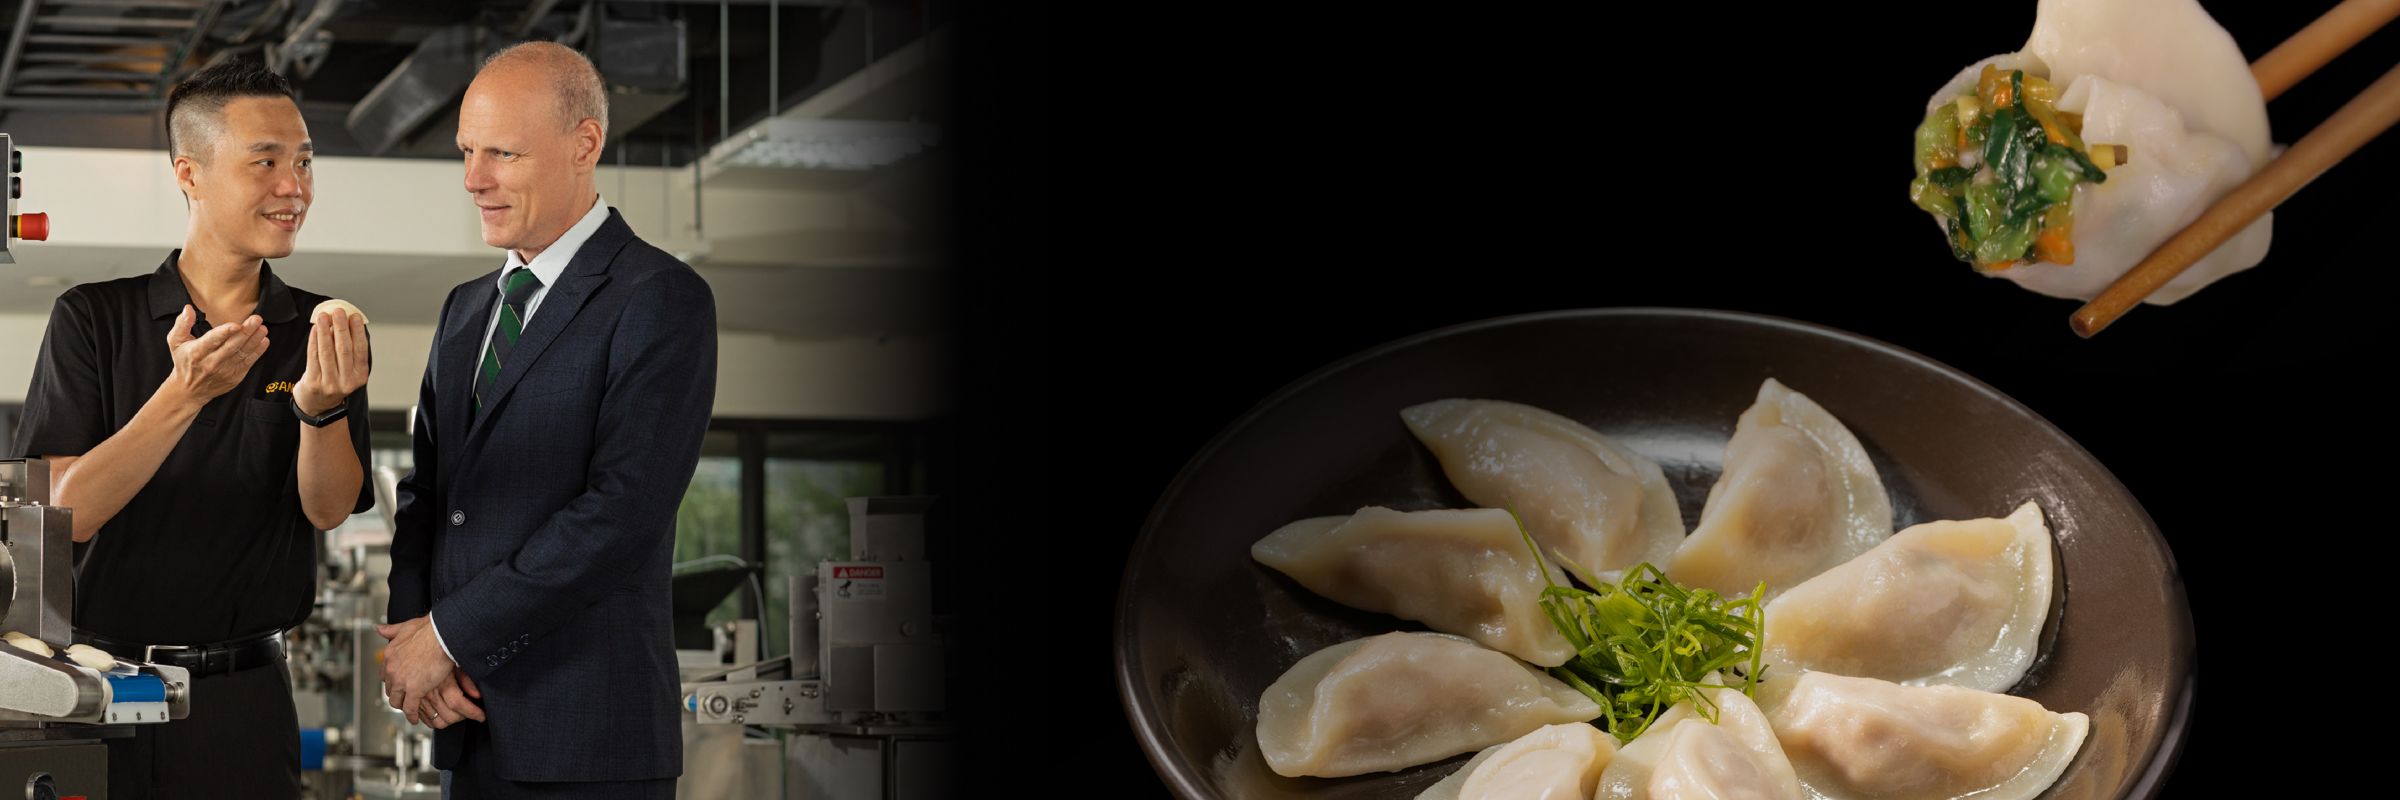 Crafting Dumplings with ANKO's Advanced Machines  See how ANKO customizes the molds and resolves freezer burns